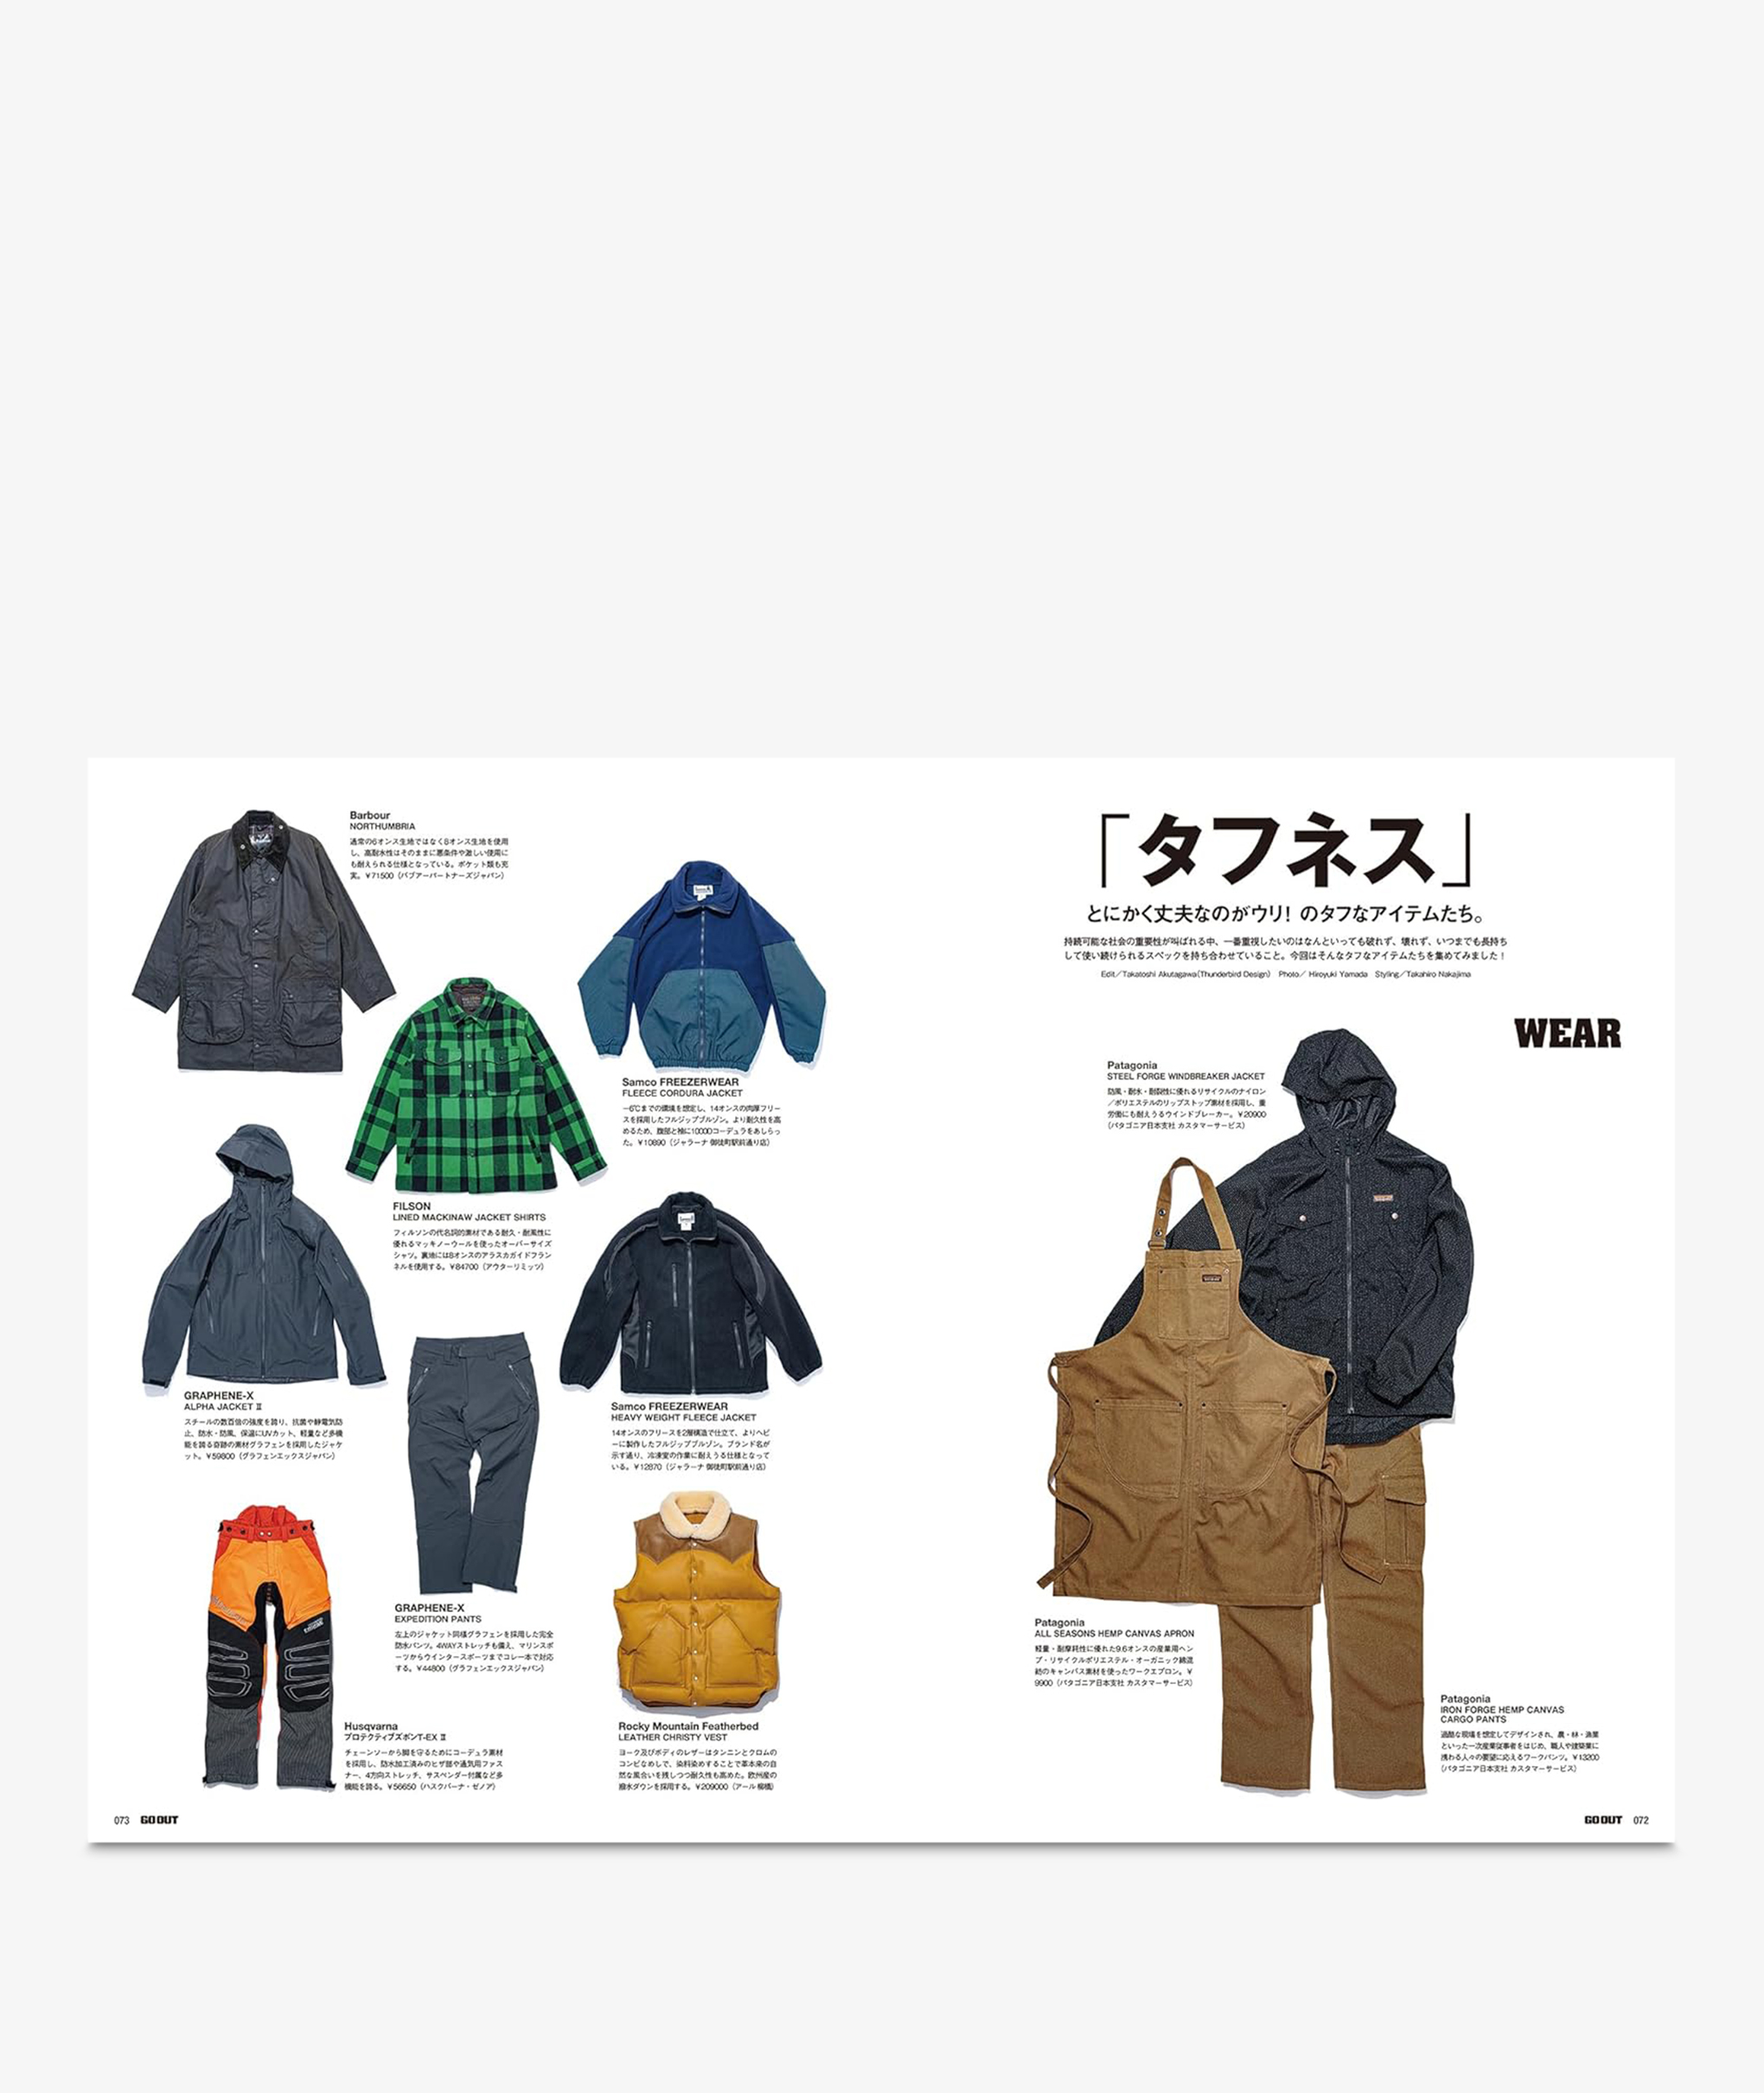 Norse Store  Shipping Worldwide - Go Out Go Out Camp Gear Book Vol 8